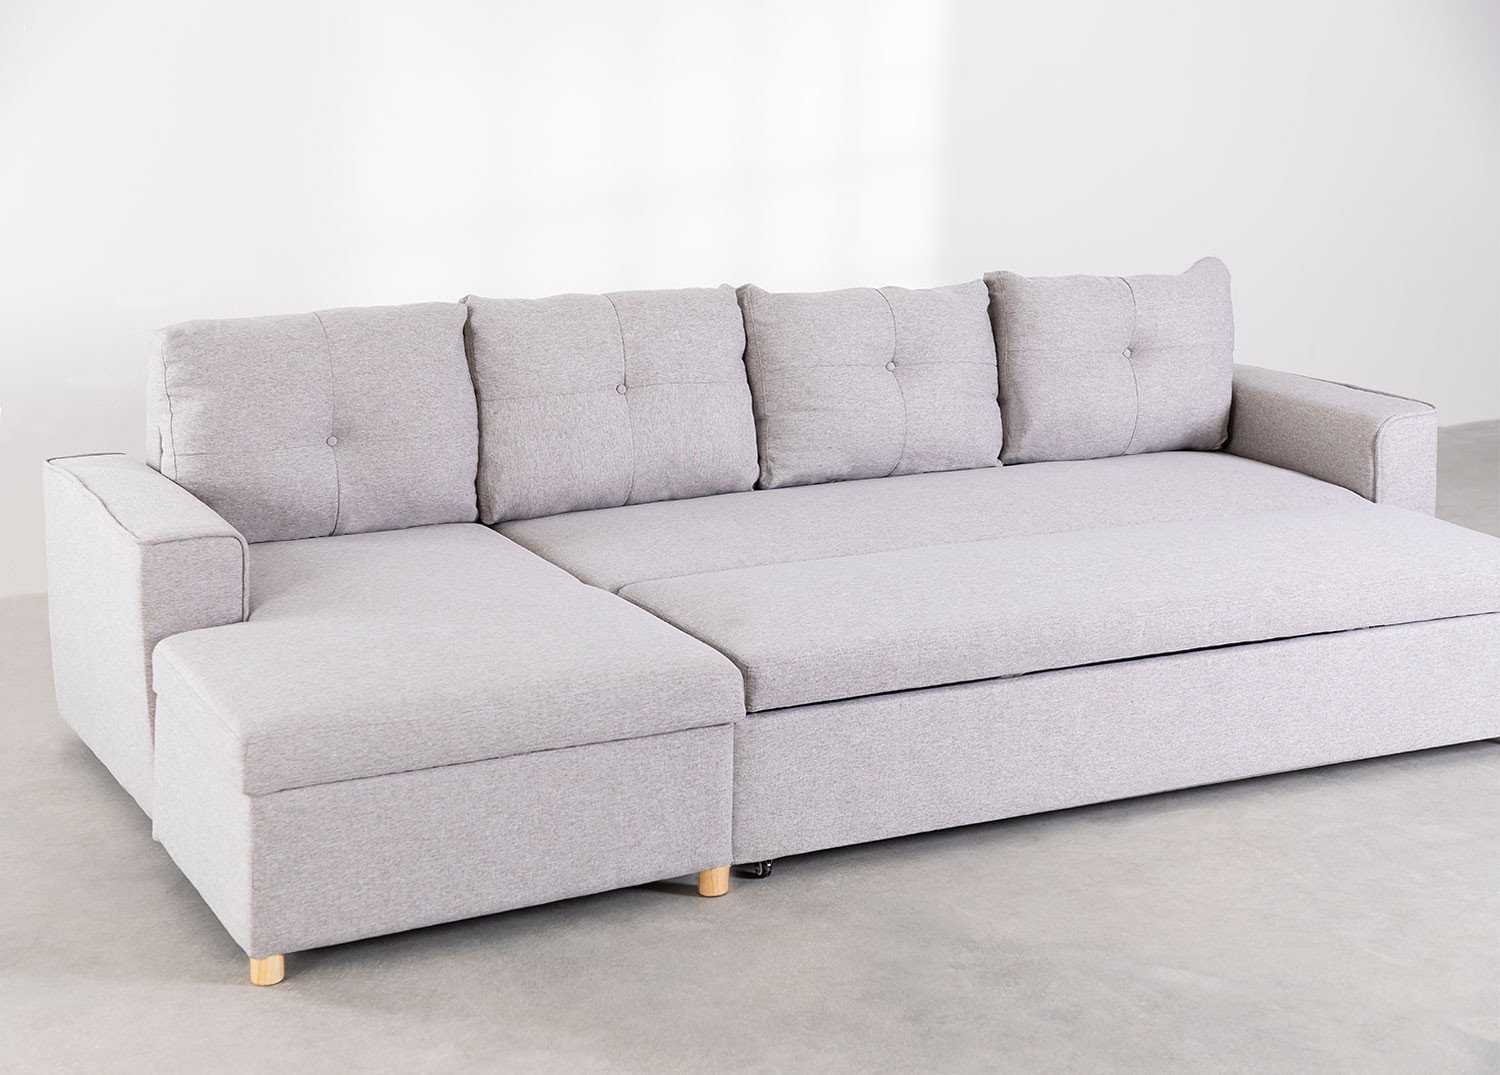 chaise longue sofa bed groupon